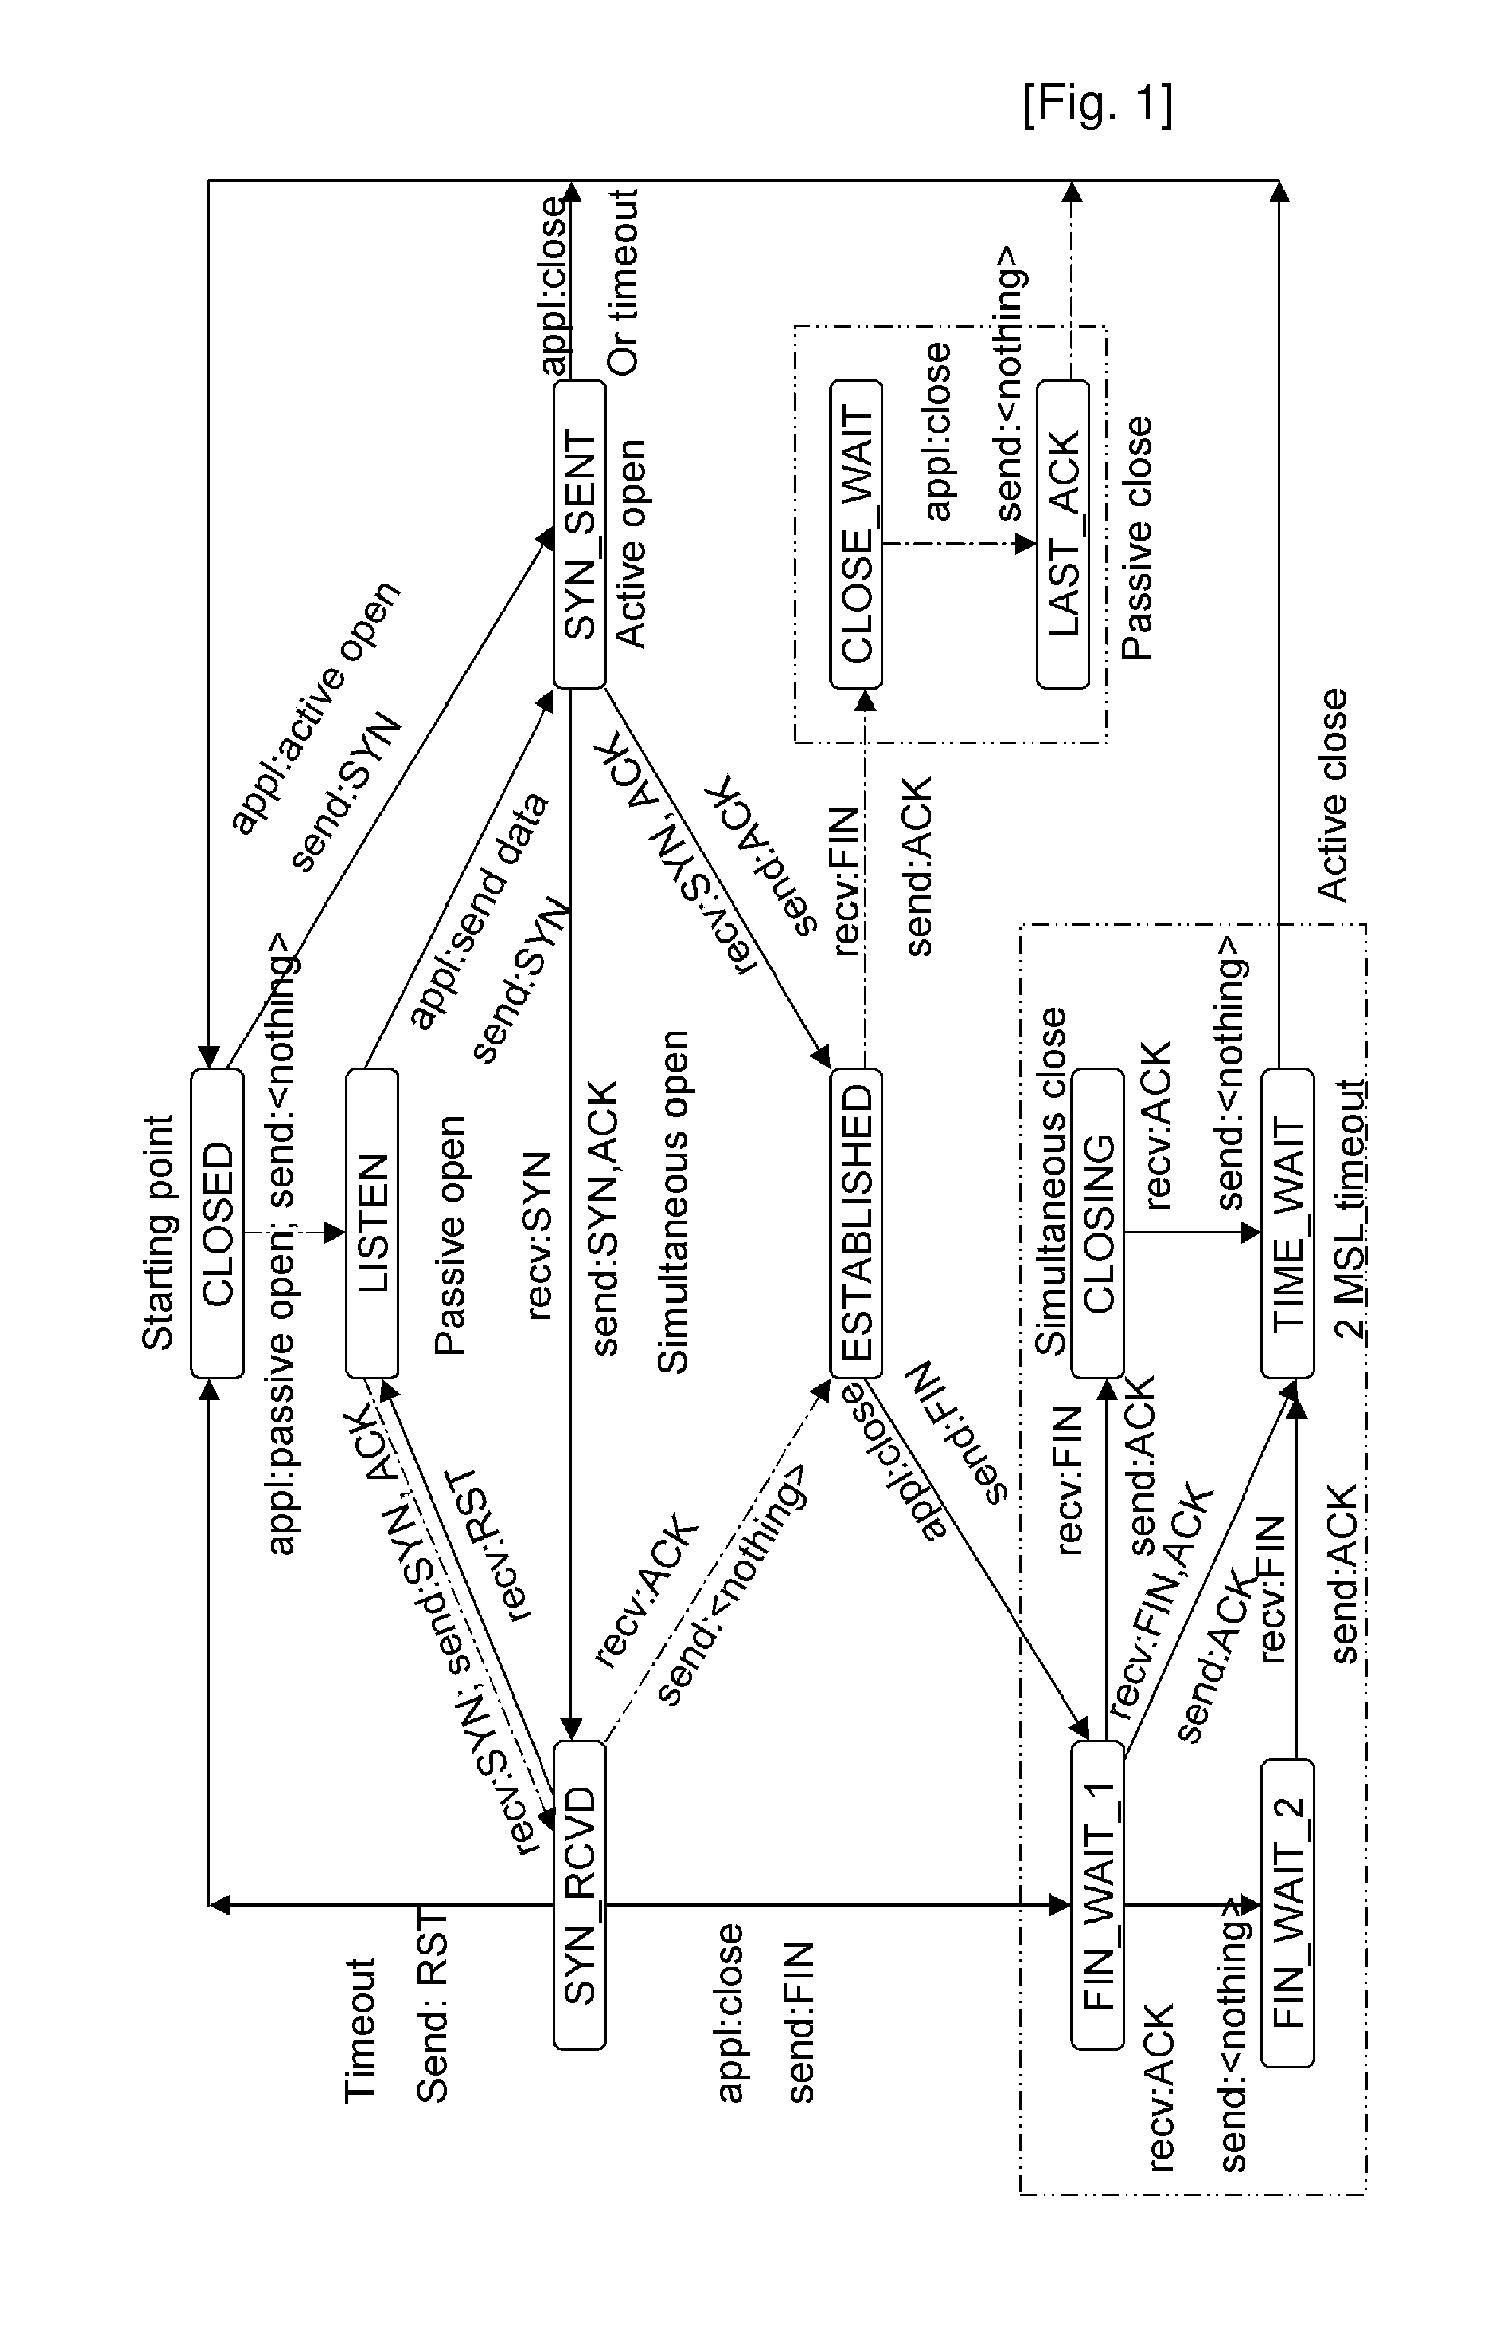 Method for Preventing Denial of Service Attacks Using Transmission Control Protocol State Transition